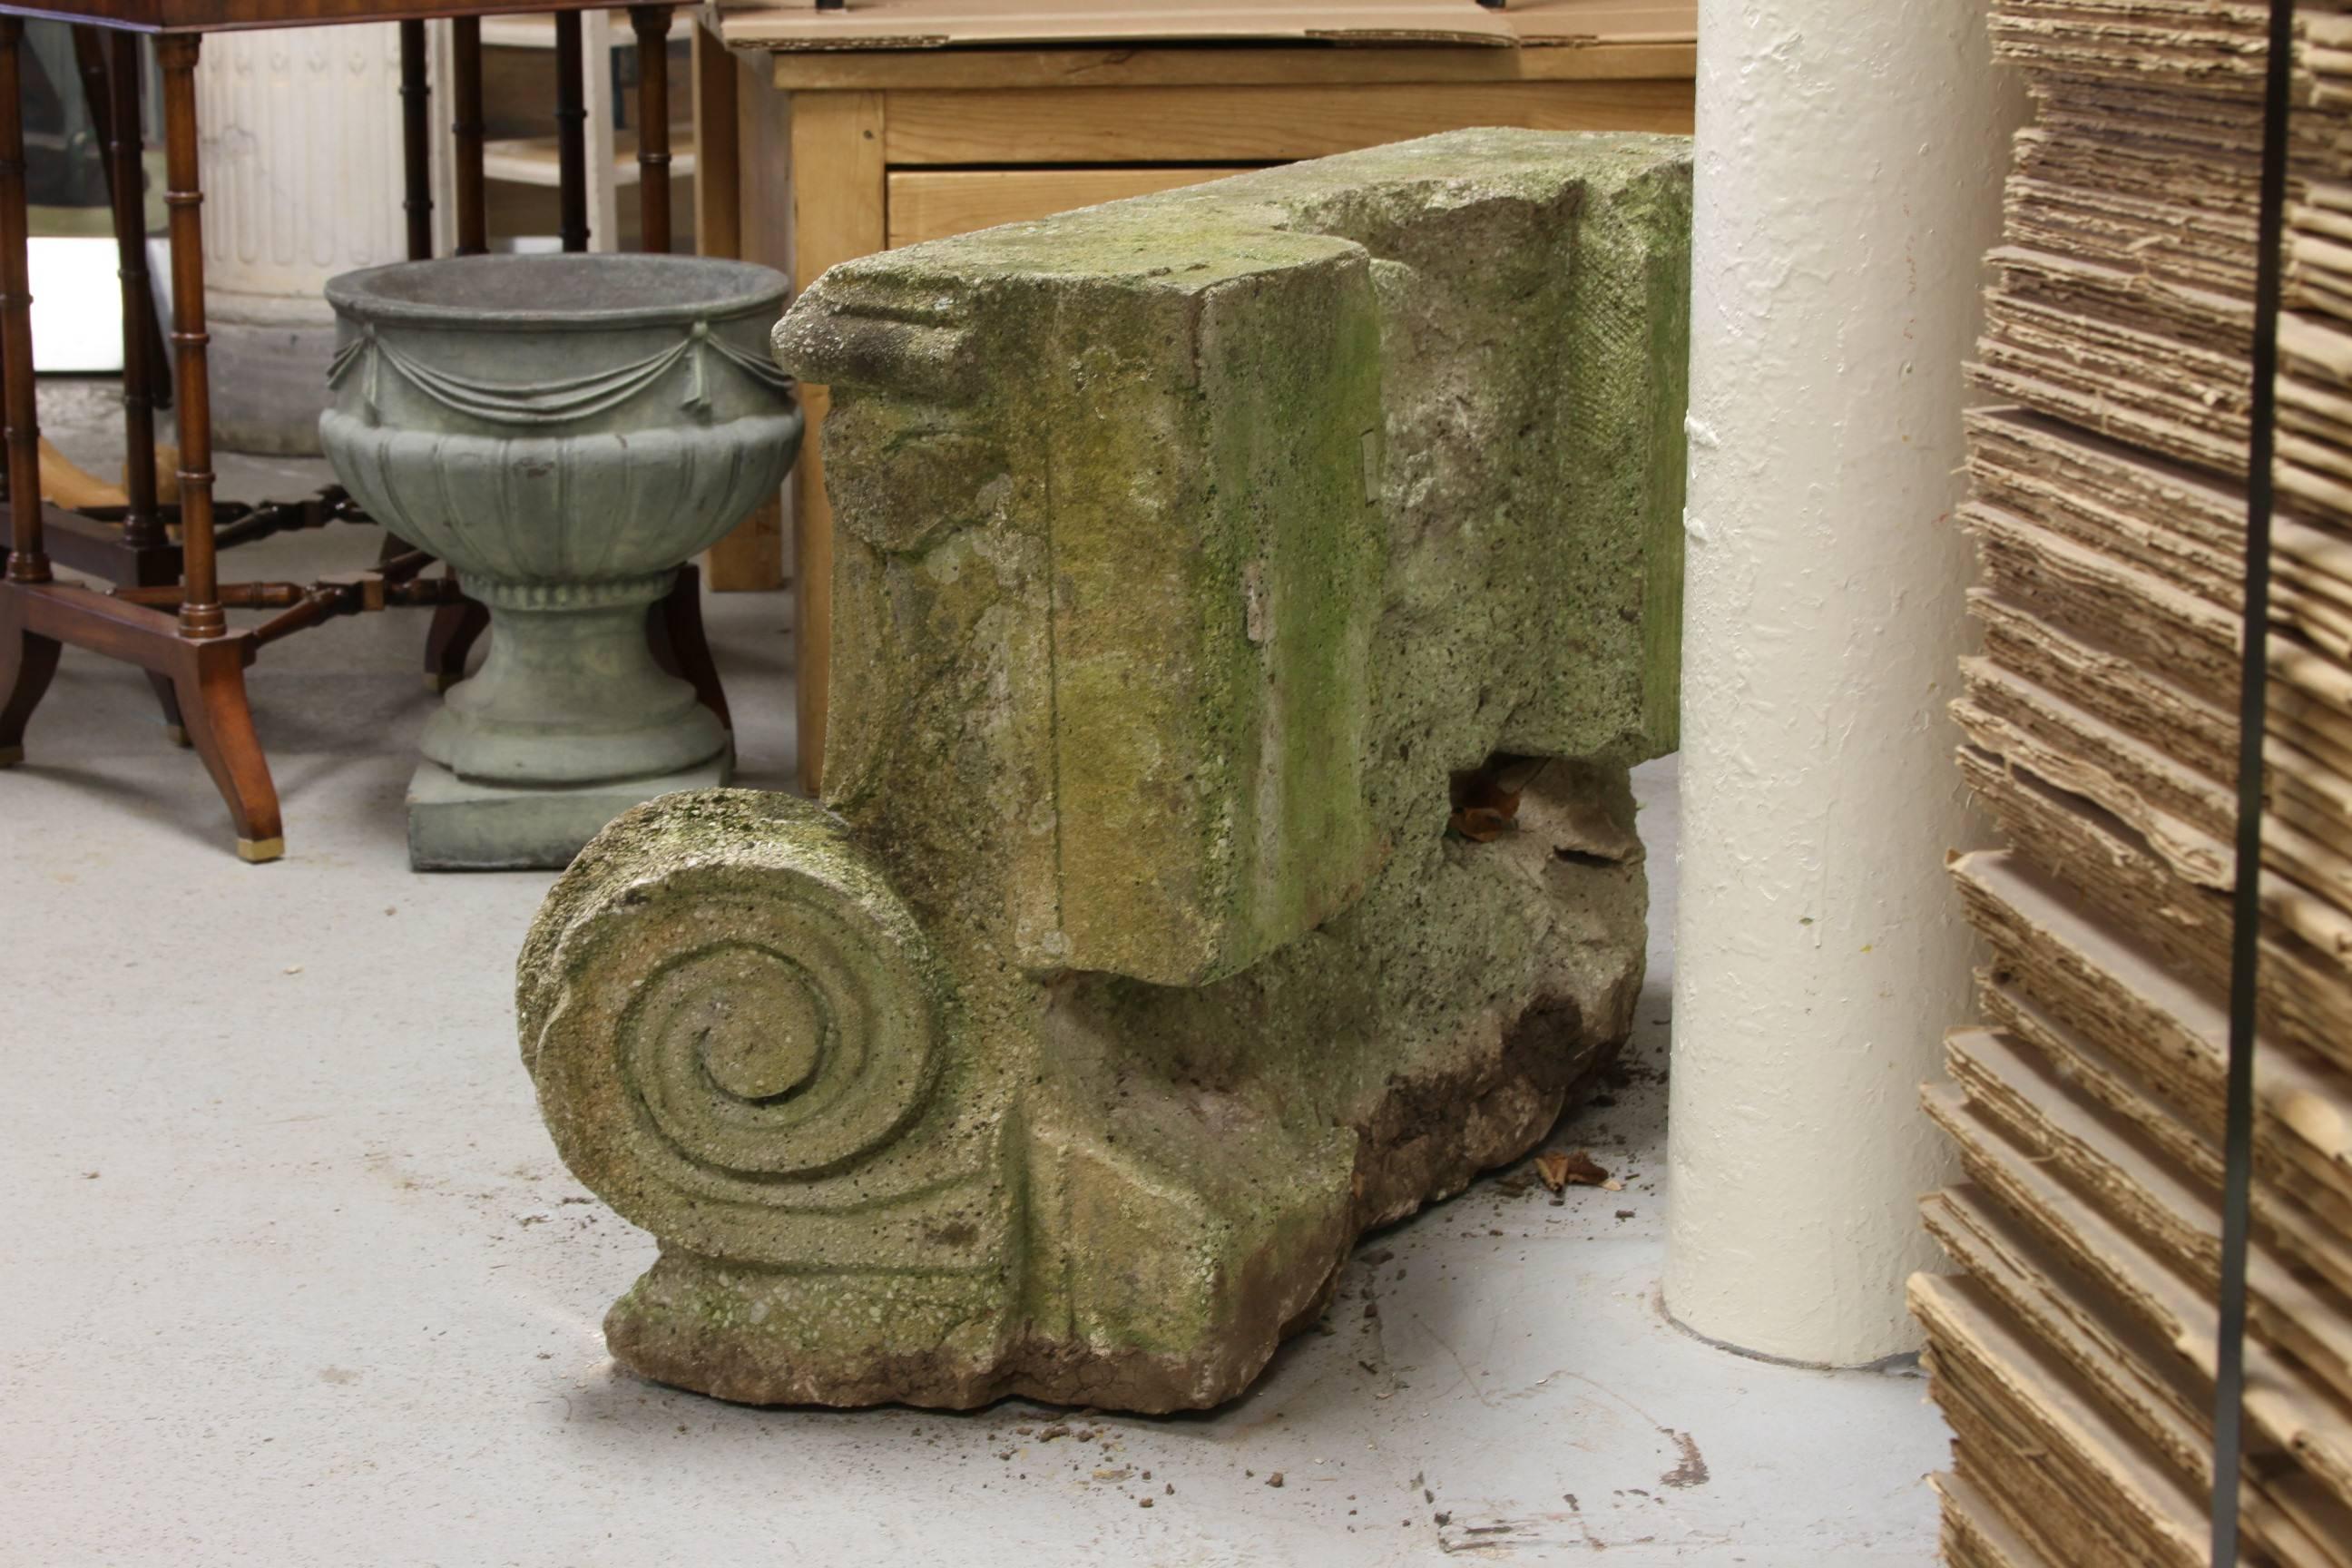 A very large cast stone garden capital with excellent age and patina. Extremely sturdy with good weight and suitable as garden ornament, bench, or table base.